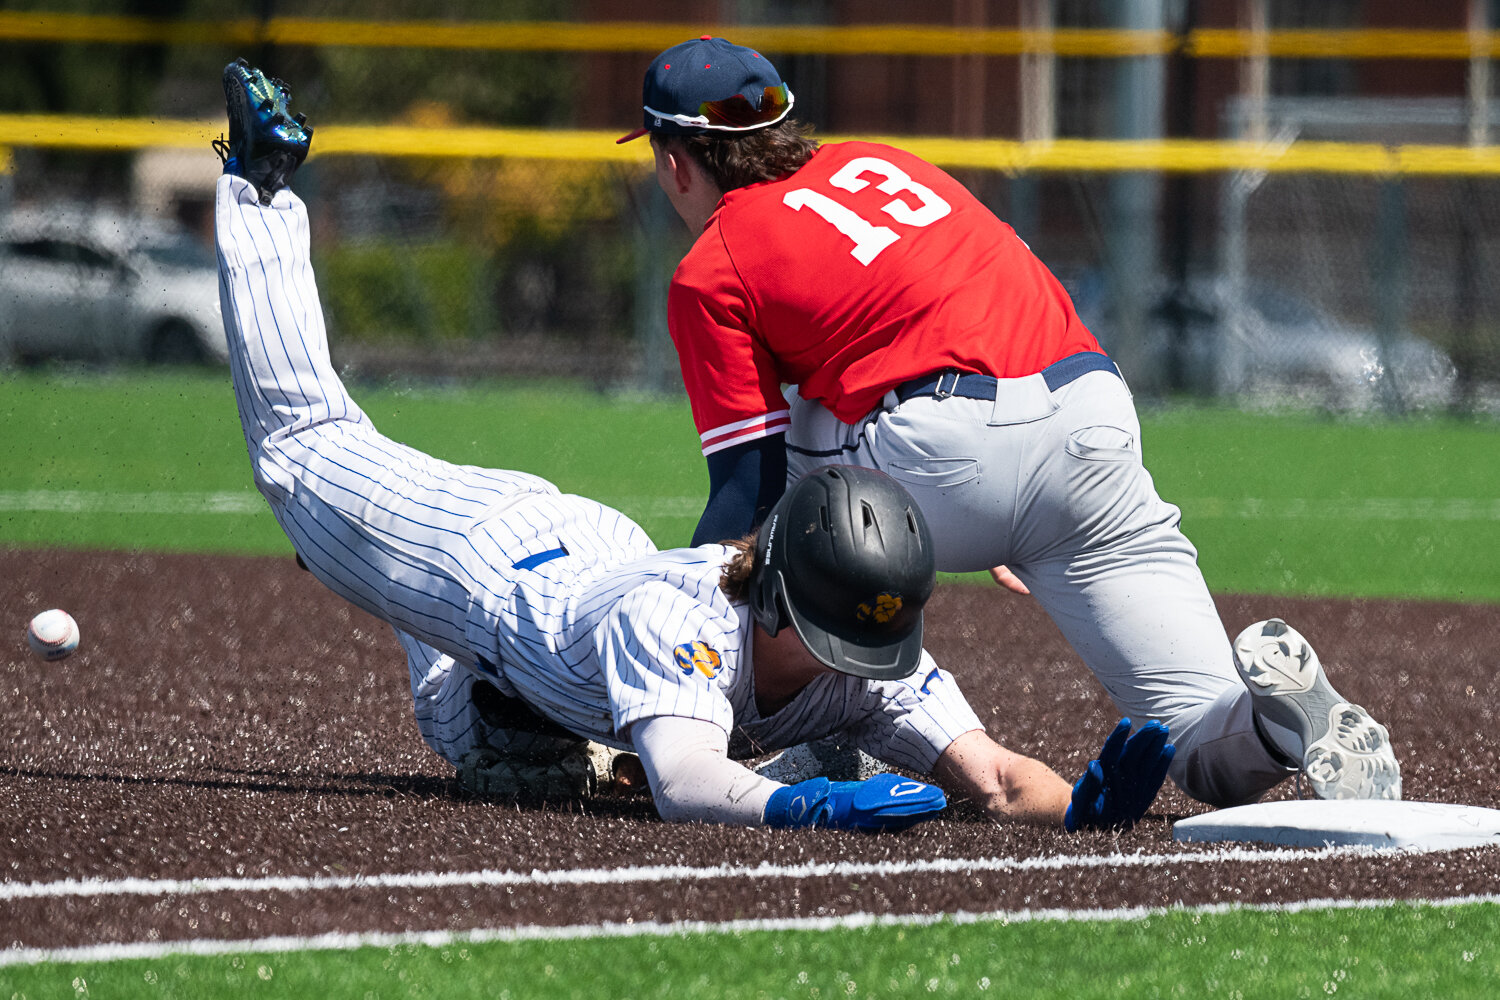 Cameron Duggan dives back to first base after getting a bit too far out on a flyout, during Centralia College's 8-3 loss to Lower Columbia on May 12.